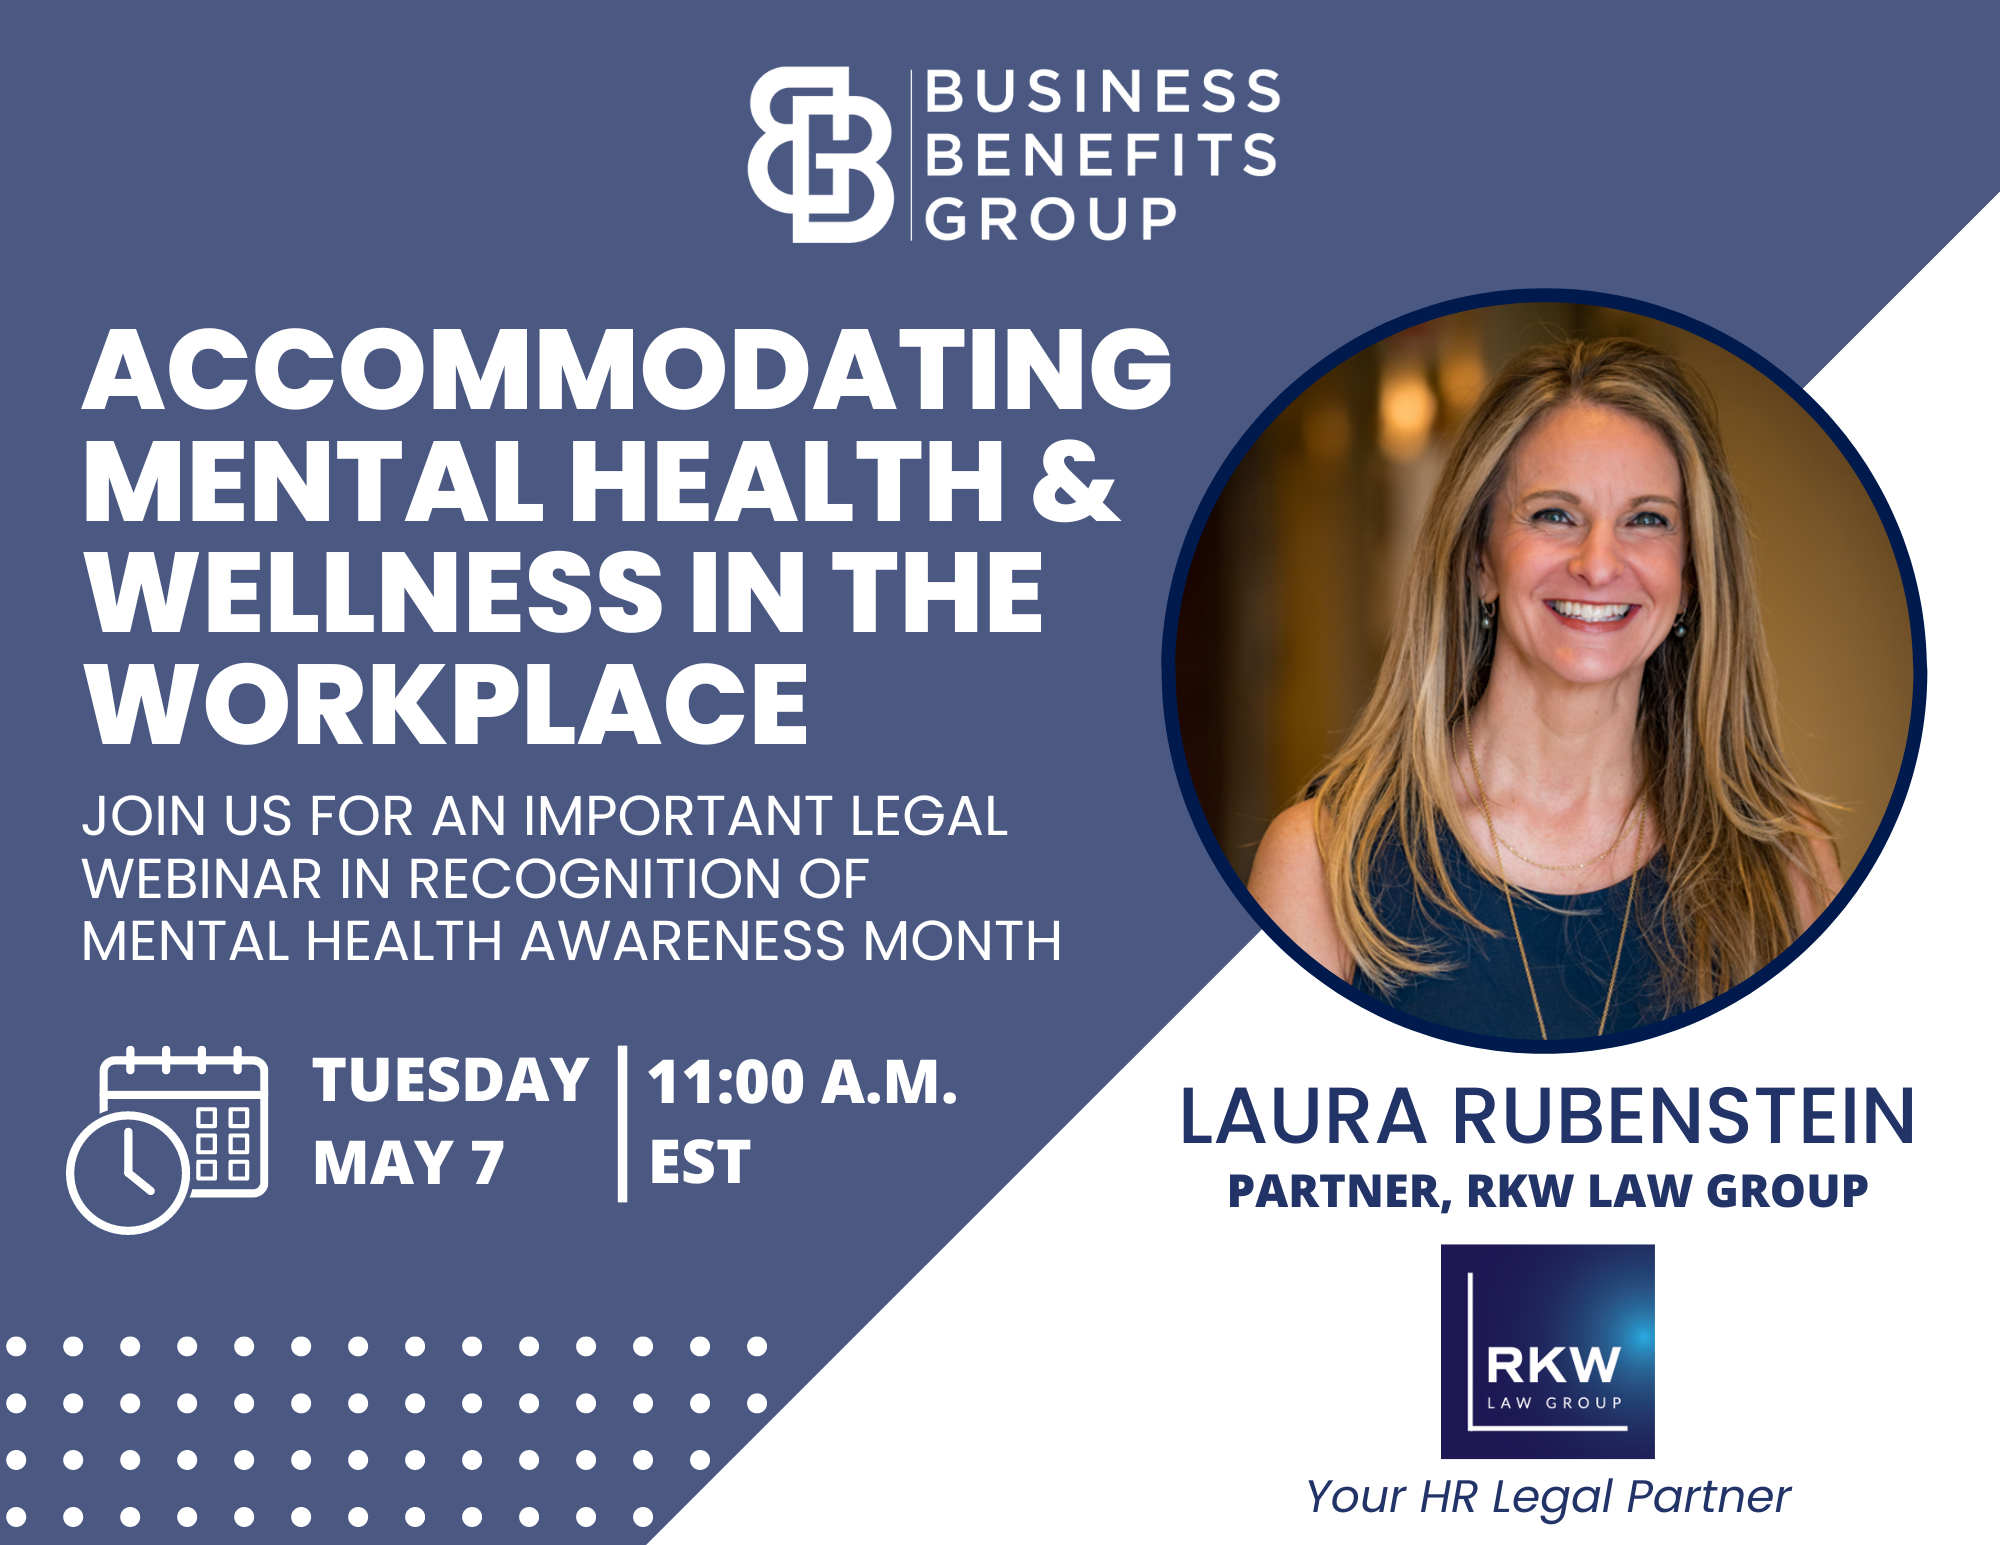 Accommodating Mental Health & Wellness the Workplace